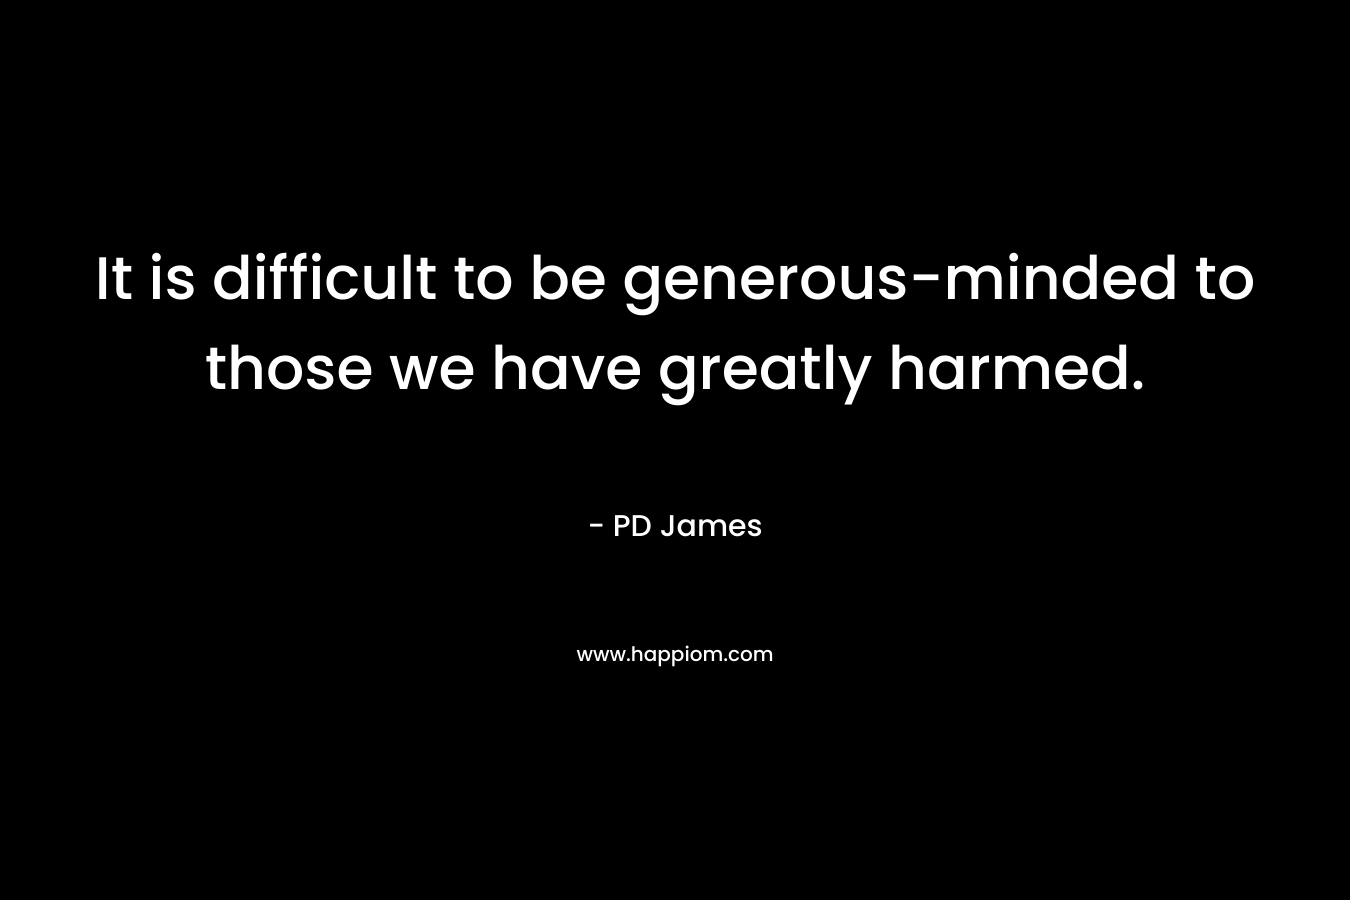 It is difficult to be generous-minded to those we have greatly harmed. – PD James